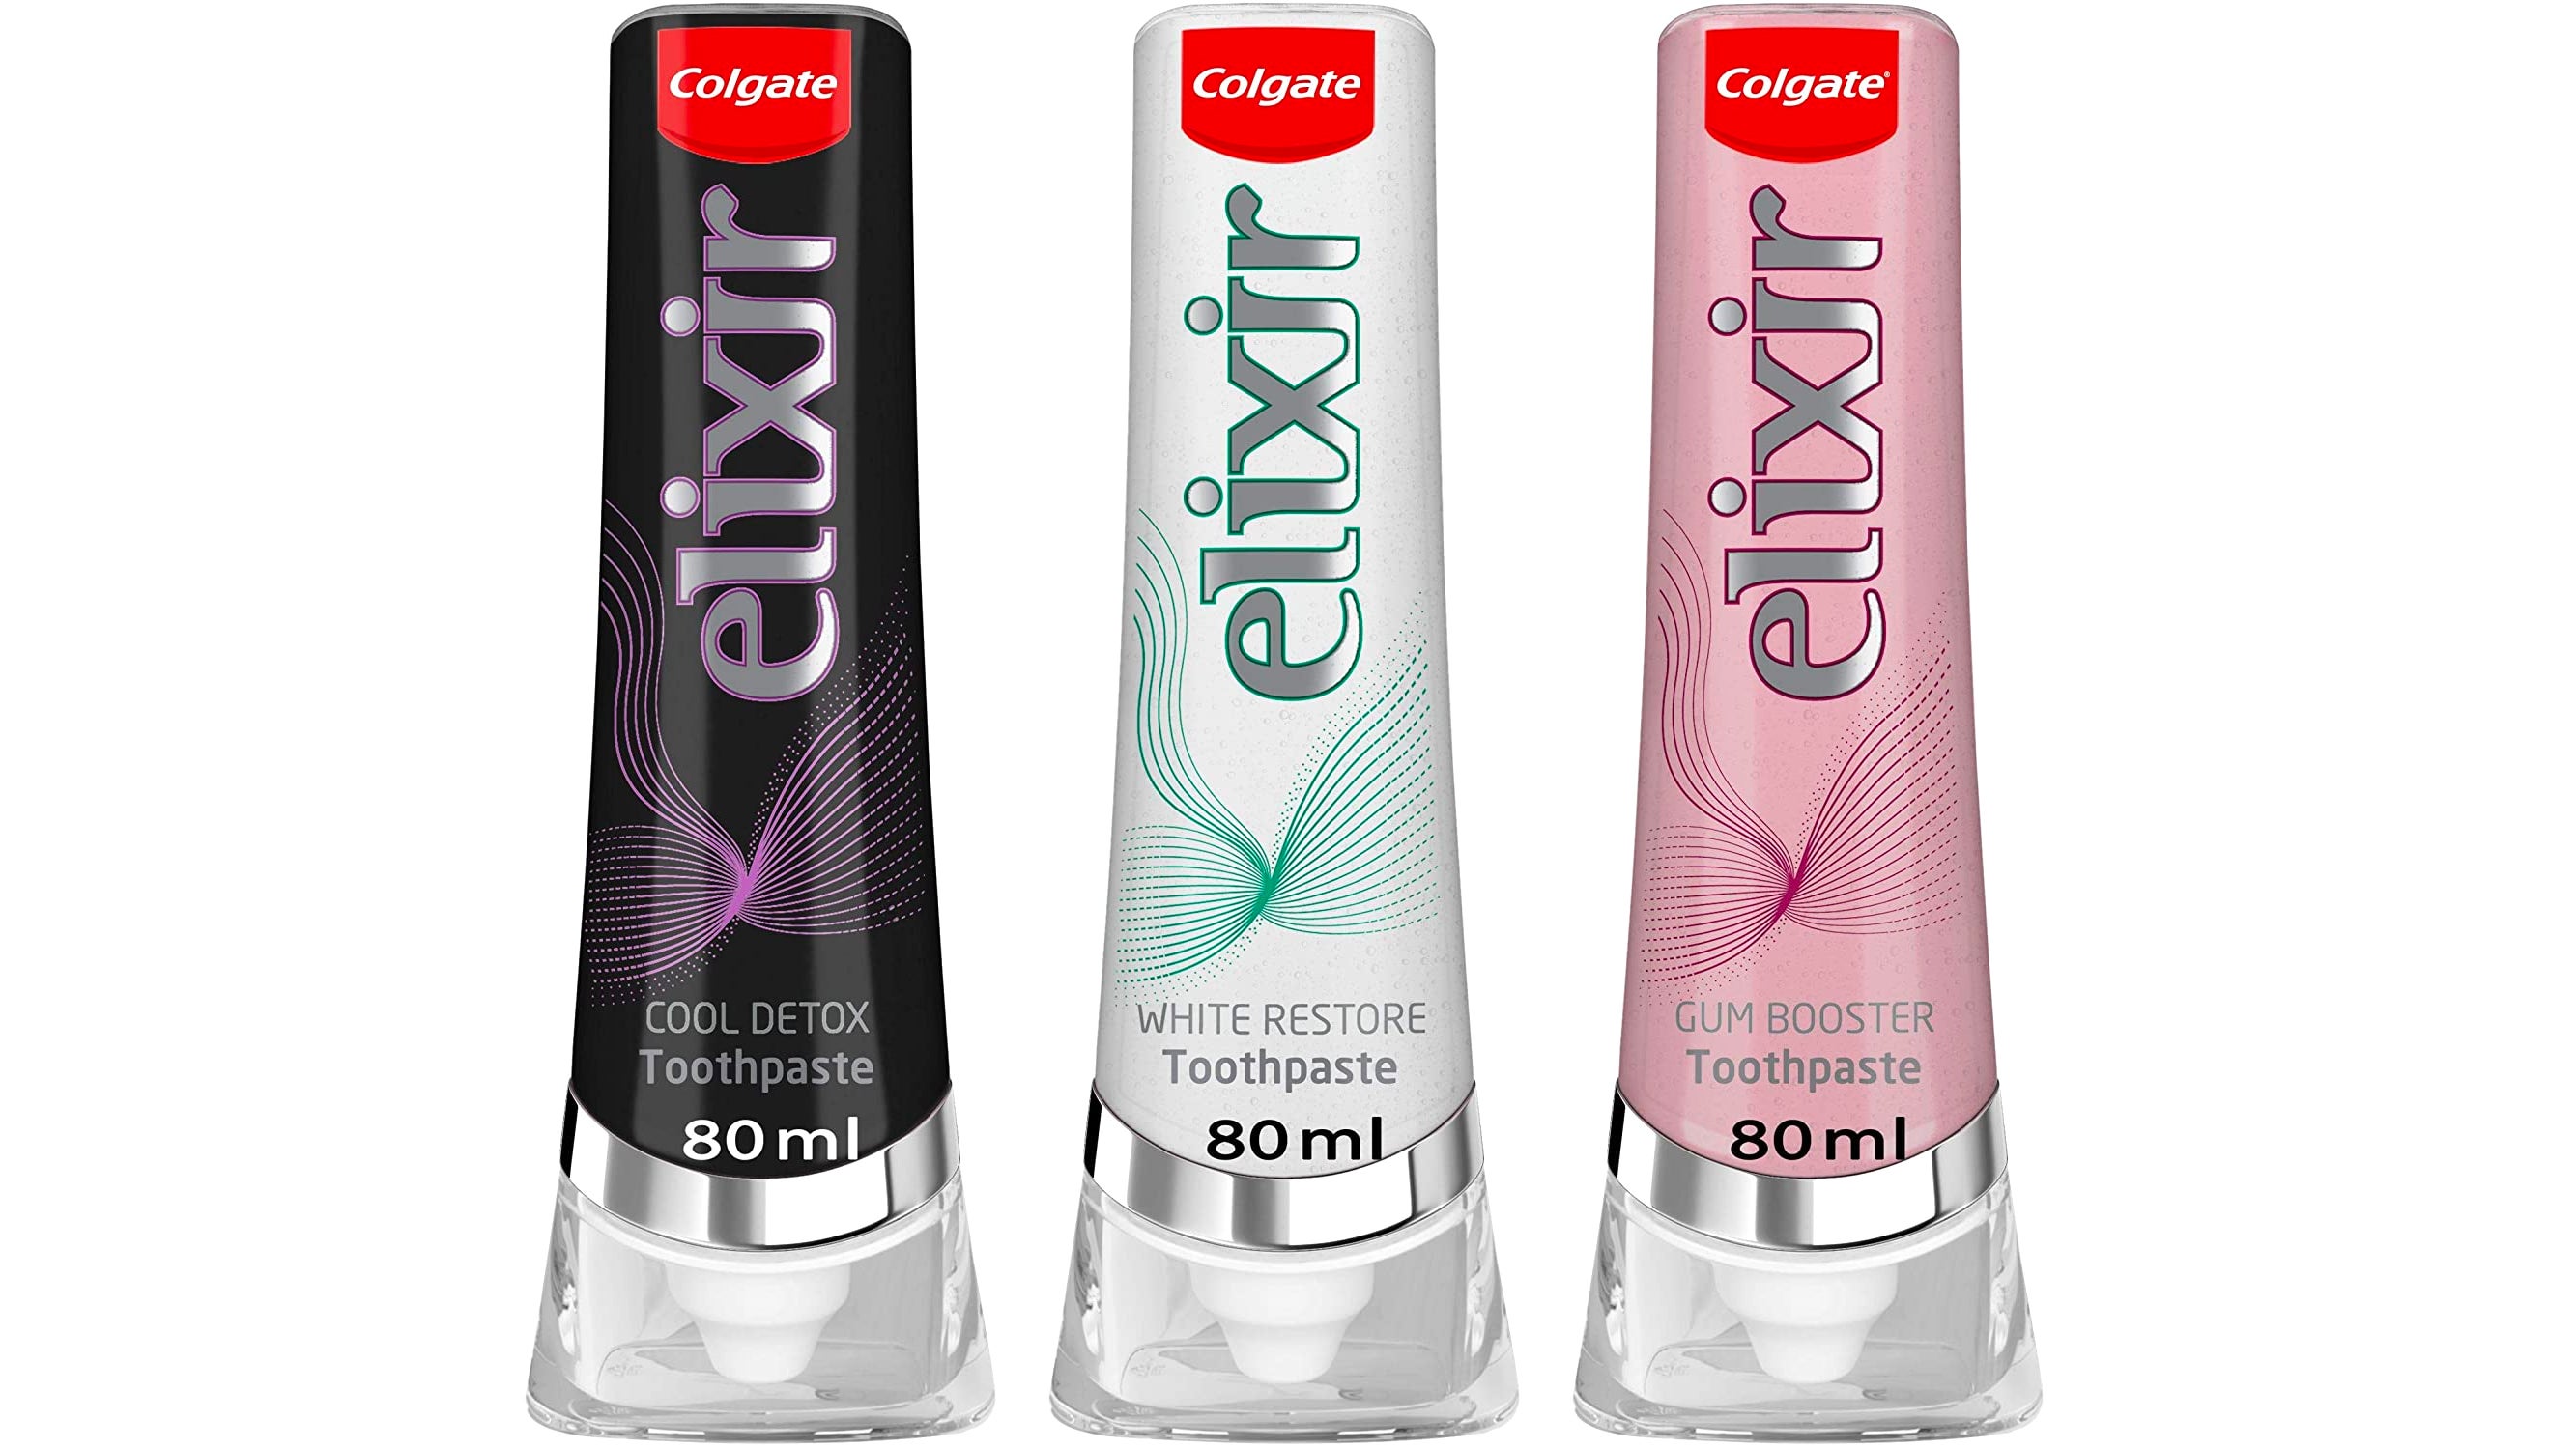 Reimagine toothbrushing with Colgate Elixir White Restore